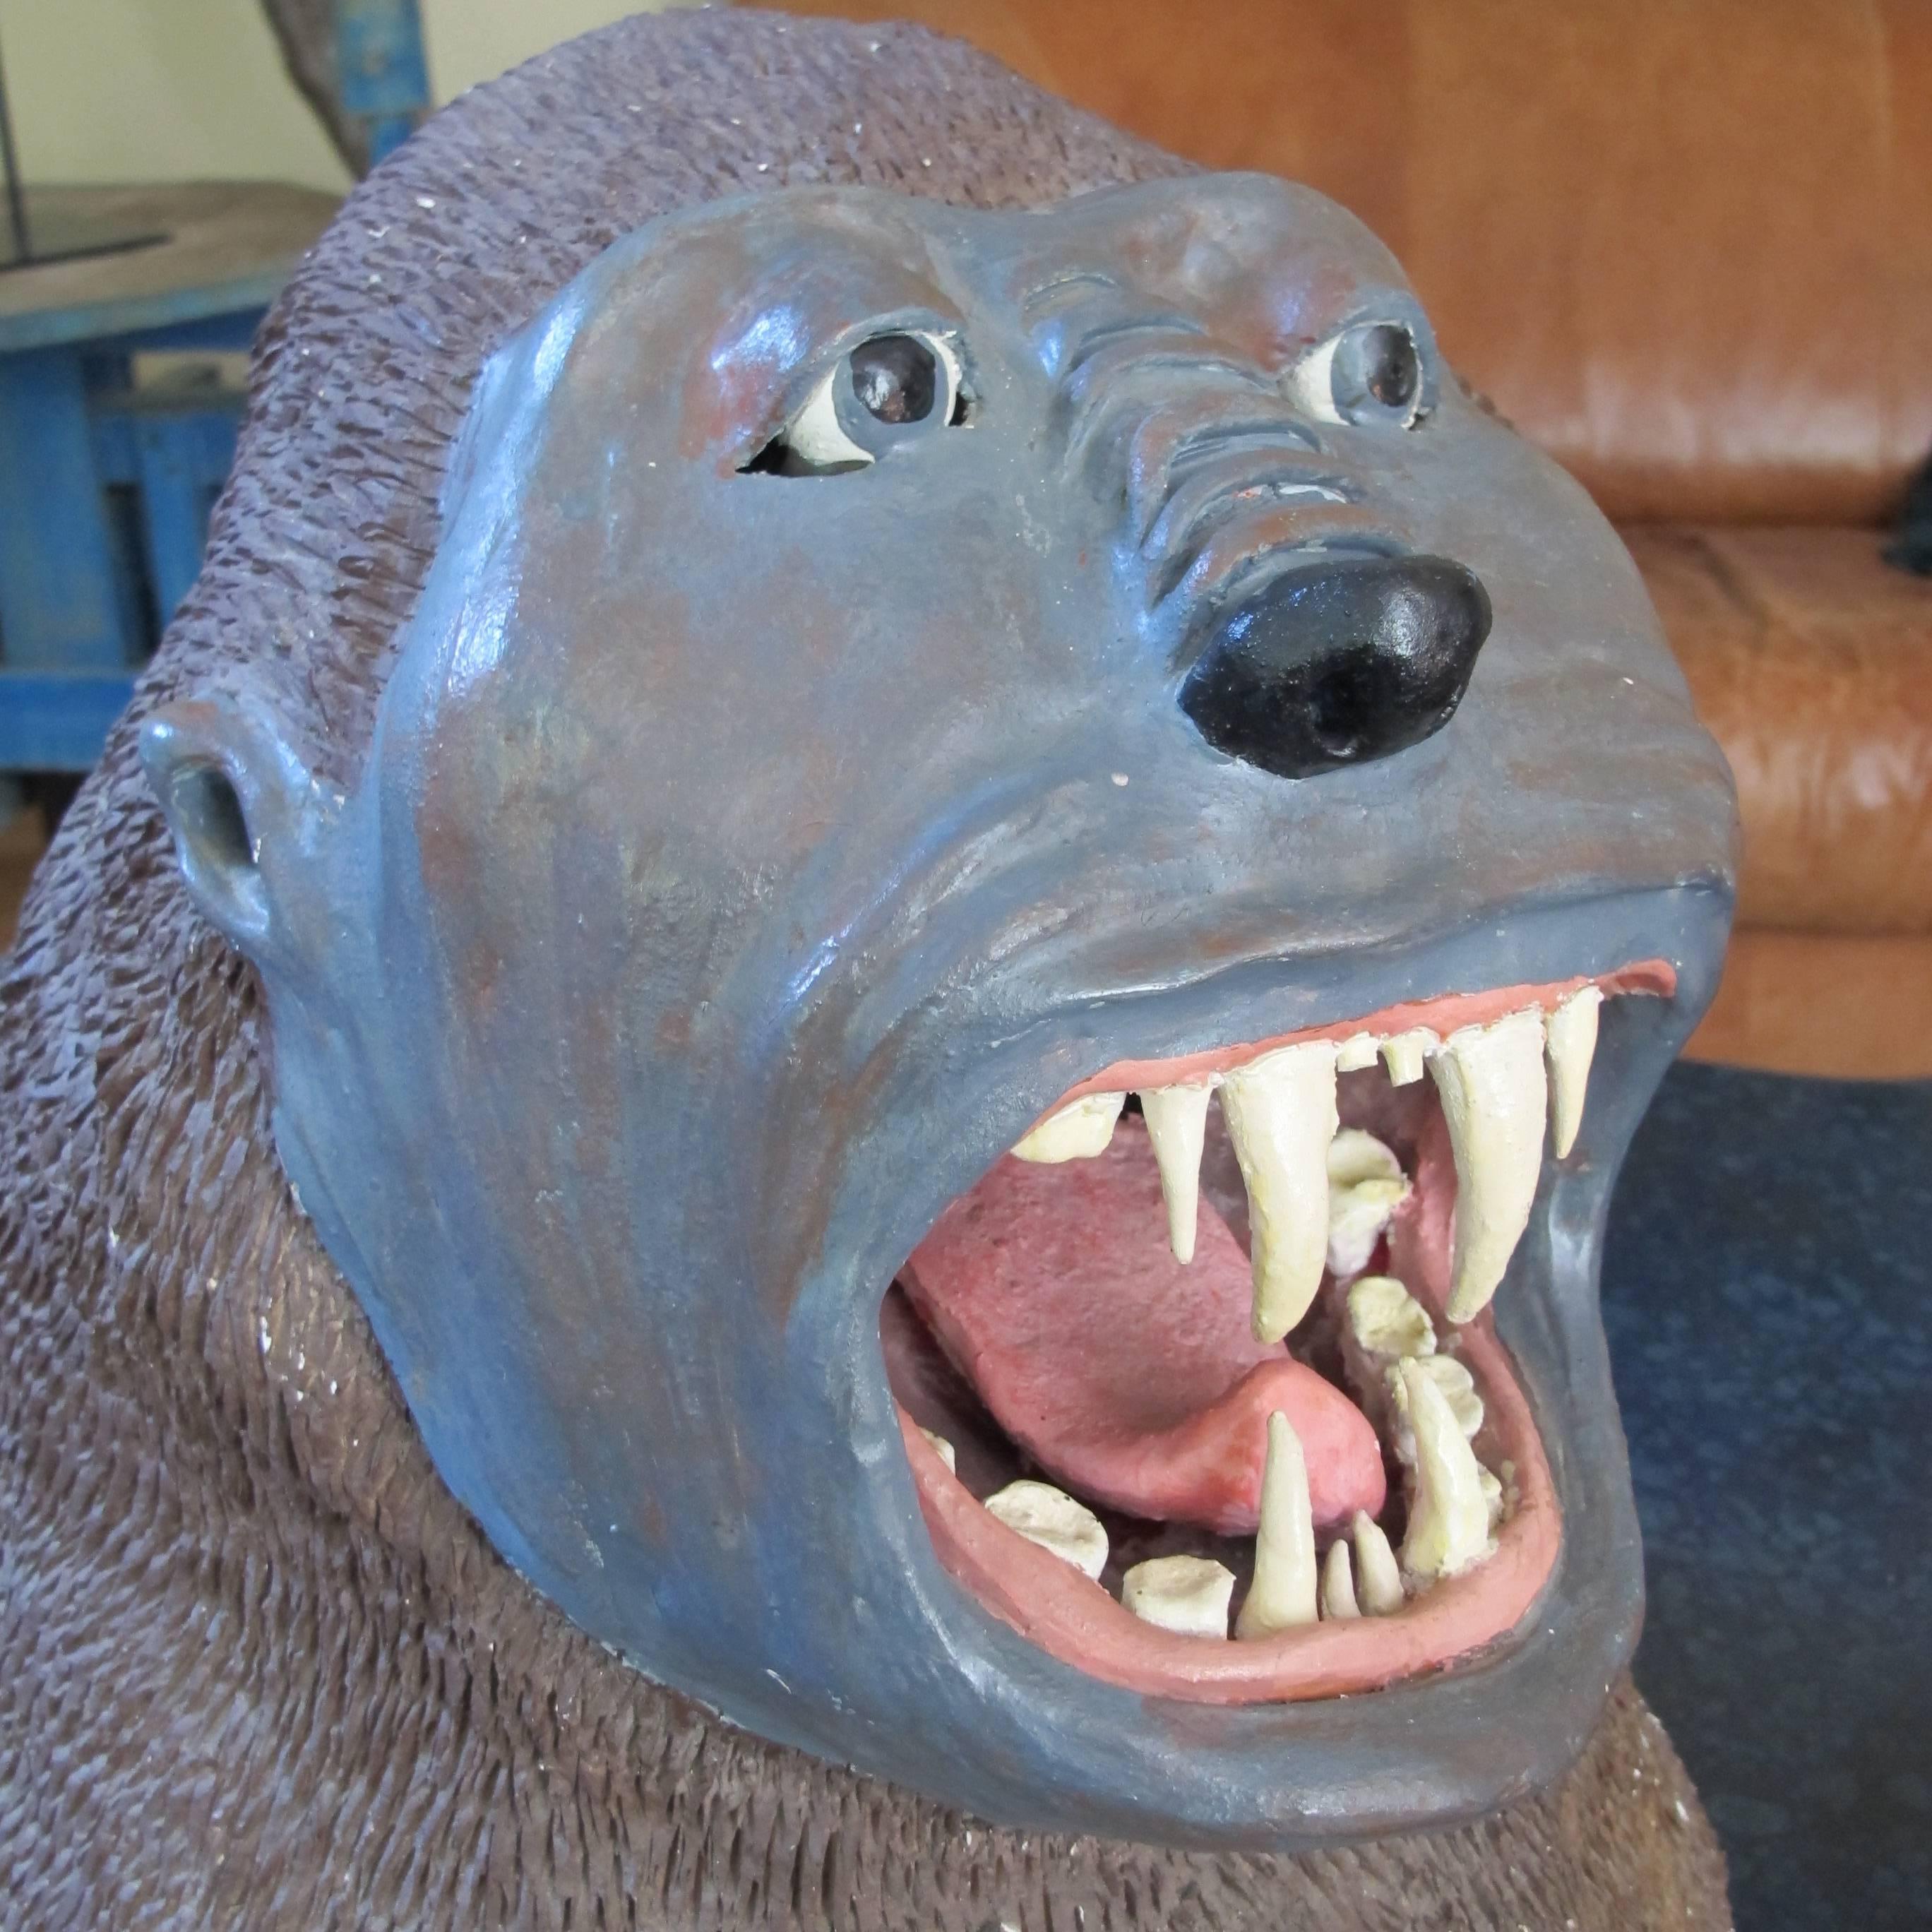 This gorilla head was said to have been set on top of a carnival shooting gallery. 
In the carnival spirit it was intended to illicit awe and wonder and maybe a little fear with the open mouth filled with sharp teeth. I was amazed to find that it